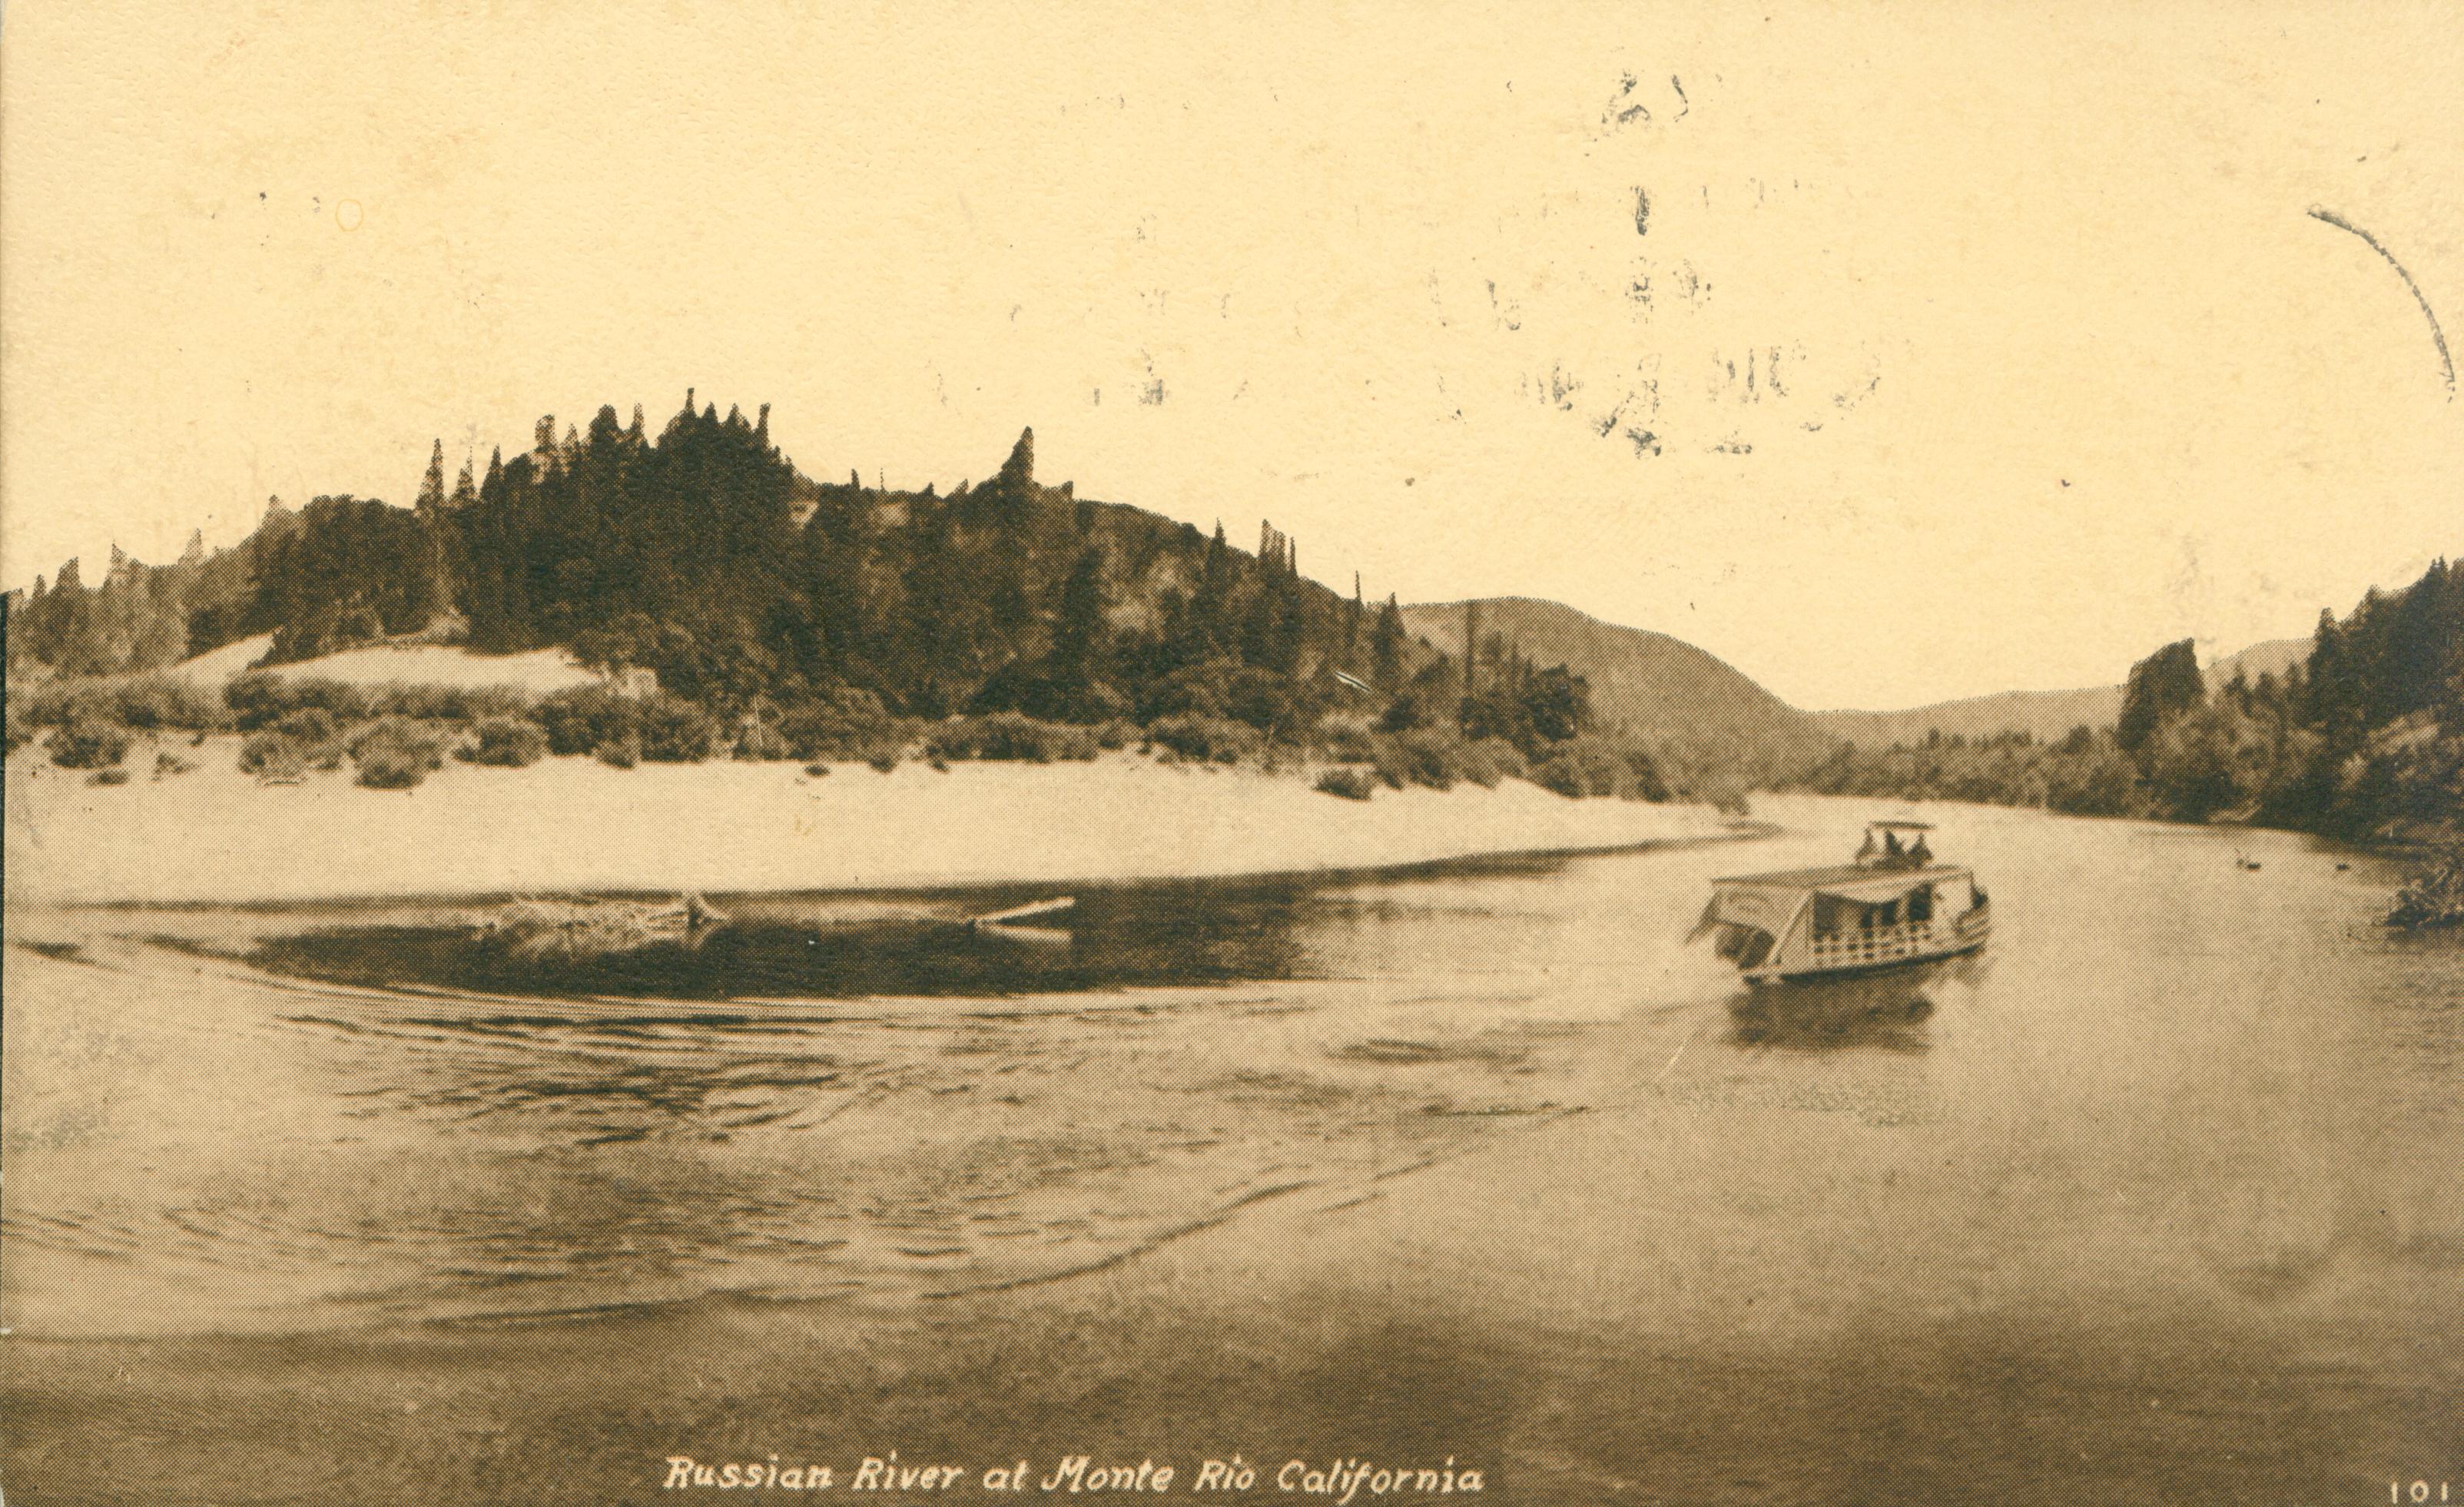 Shows a bend in the Russian River with a beach on the far show and a ferry underway